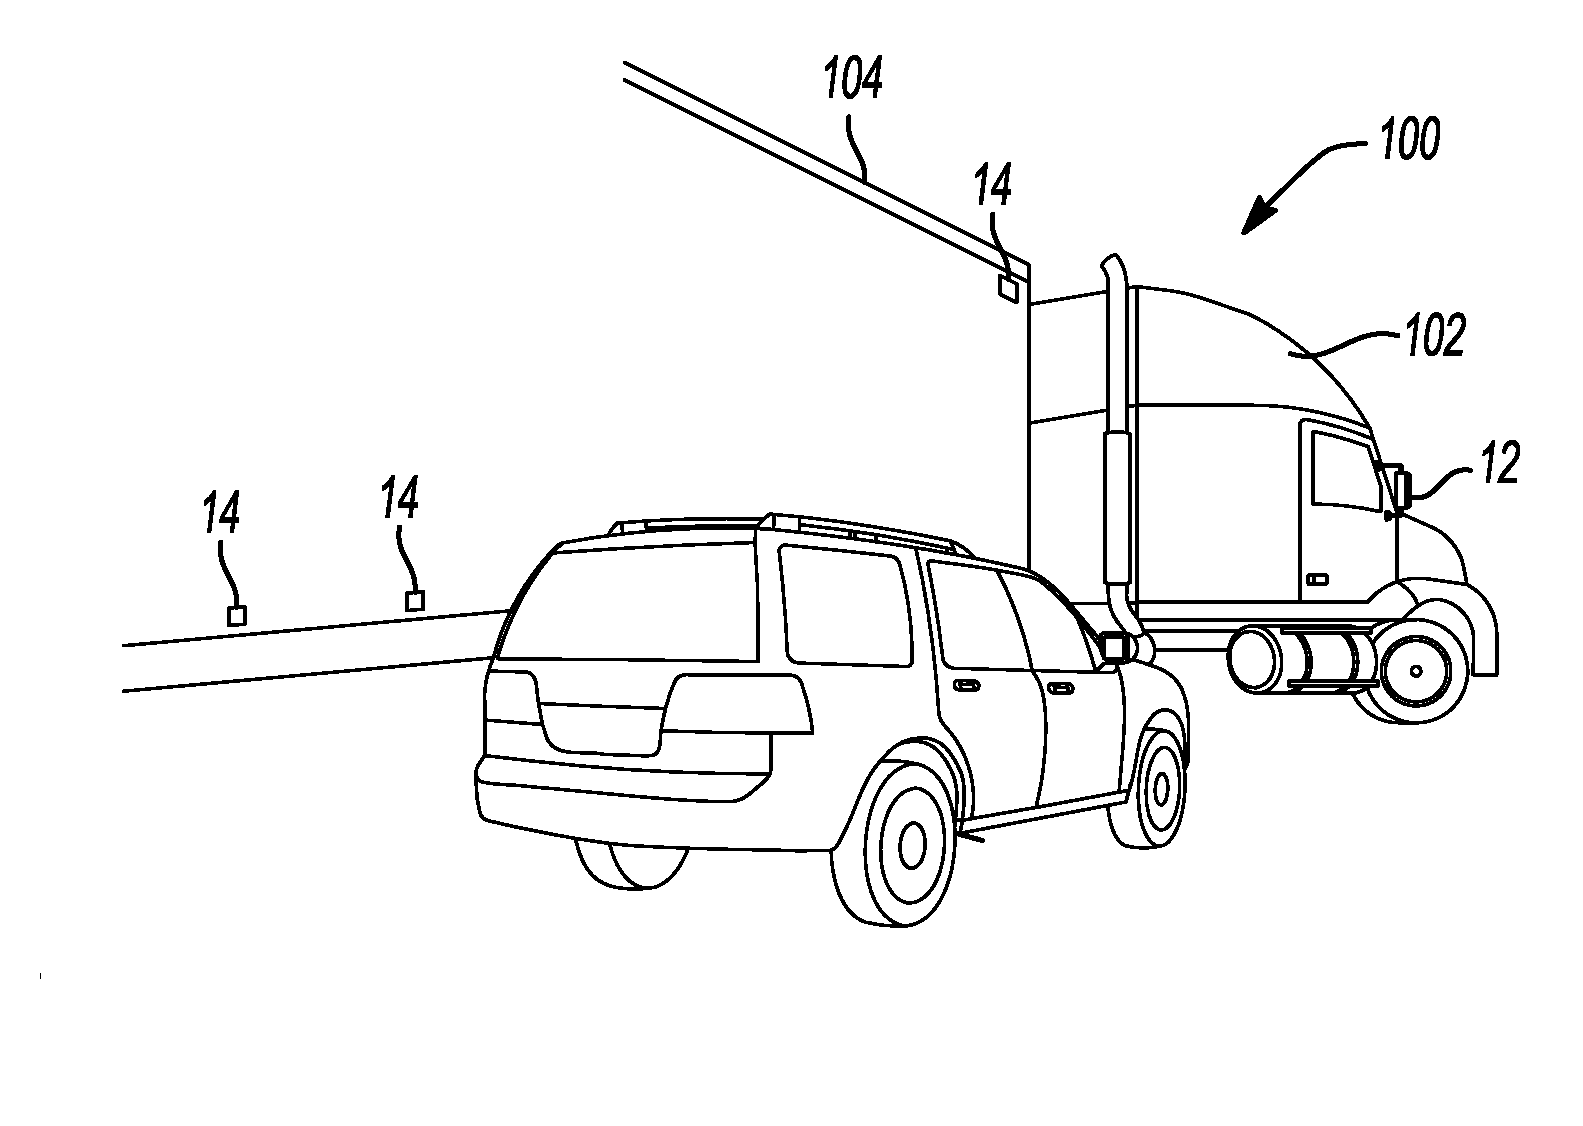 Retro-reflective radar patch antenna target for articulated vehicle trailer sensing